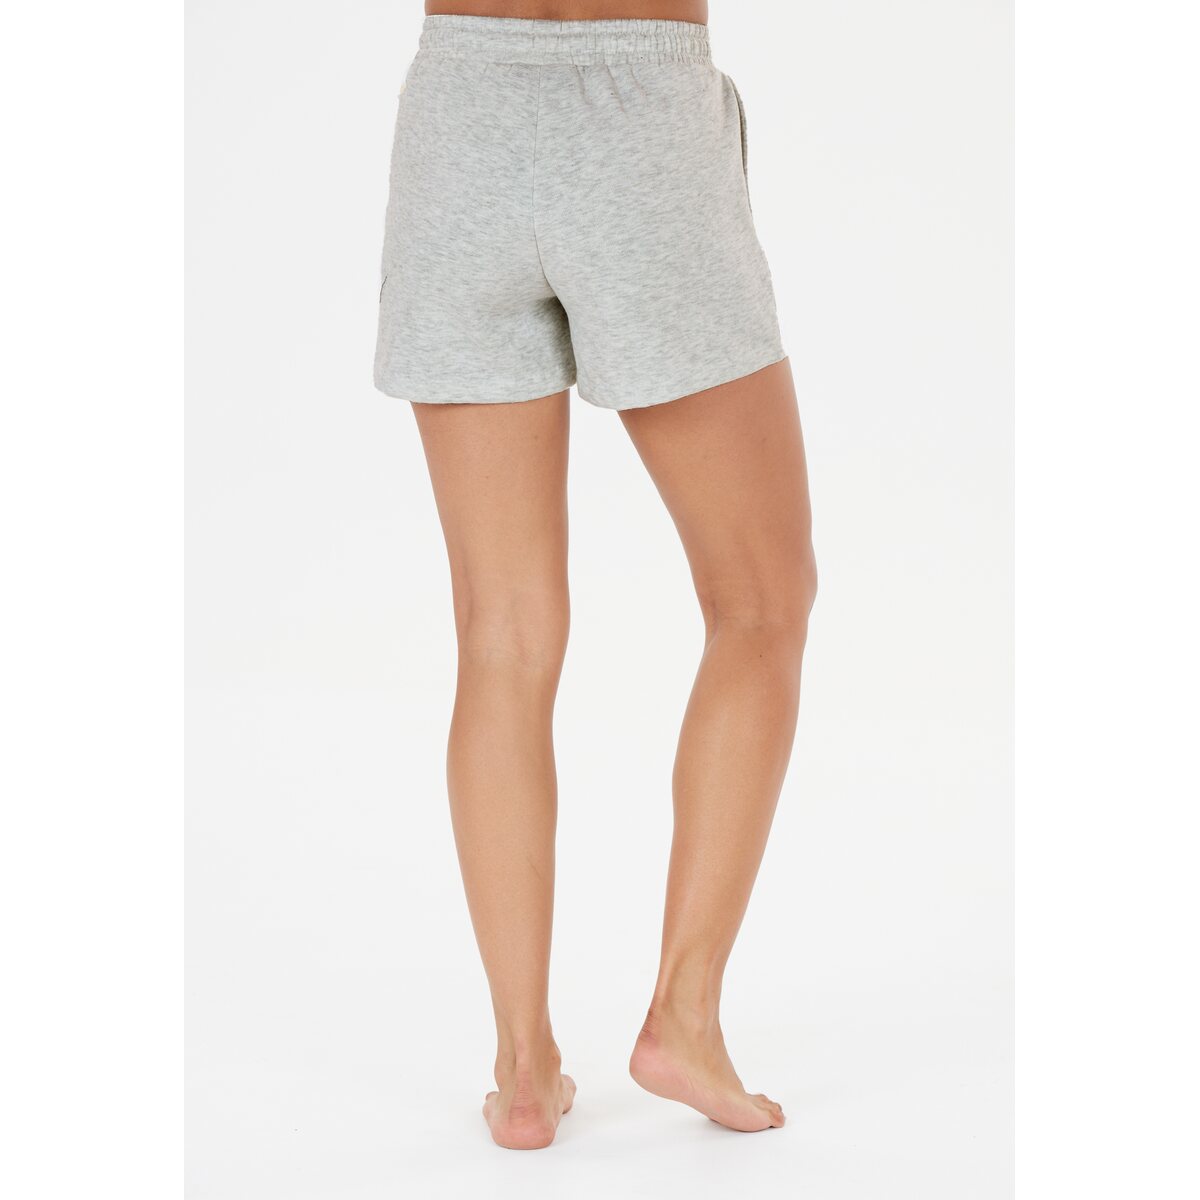 Athlecia Ruthie Womenswear Shorts 2 Shaws Department Stores